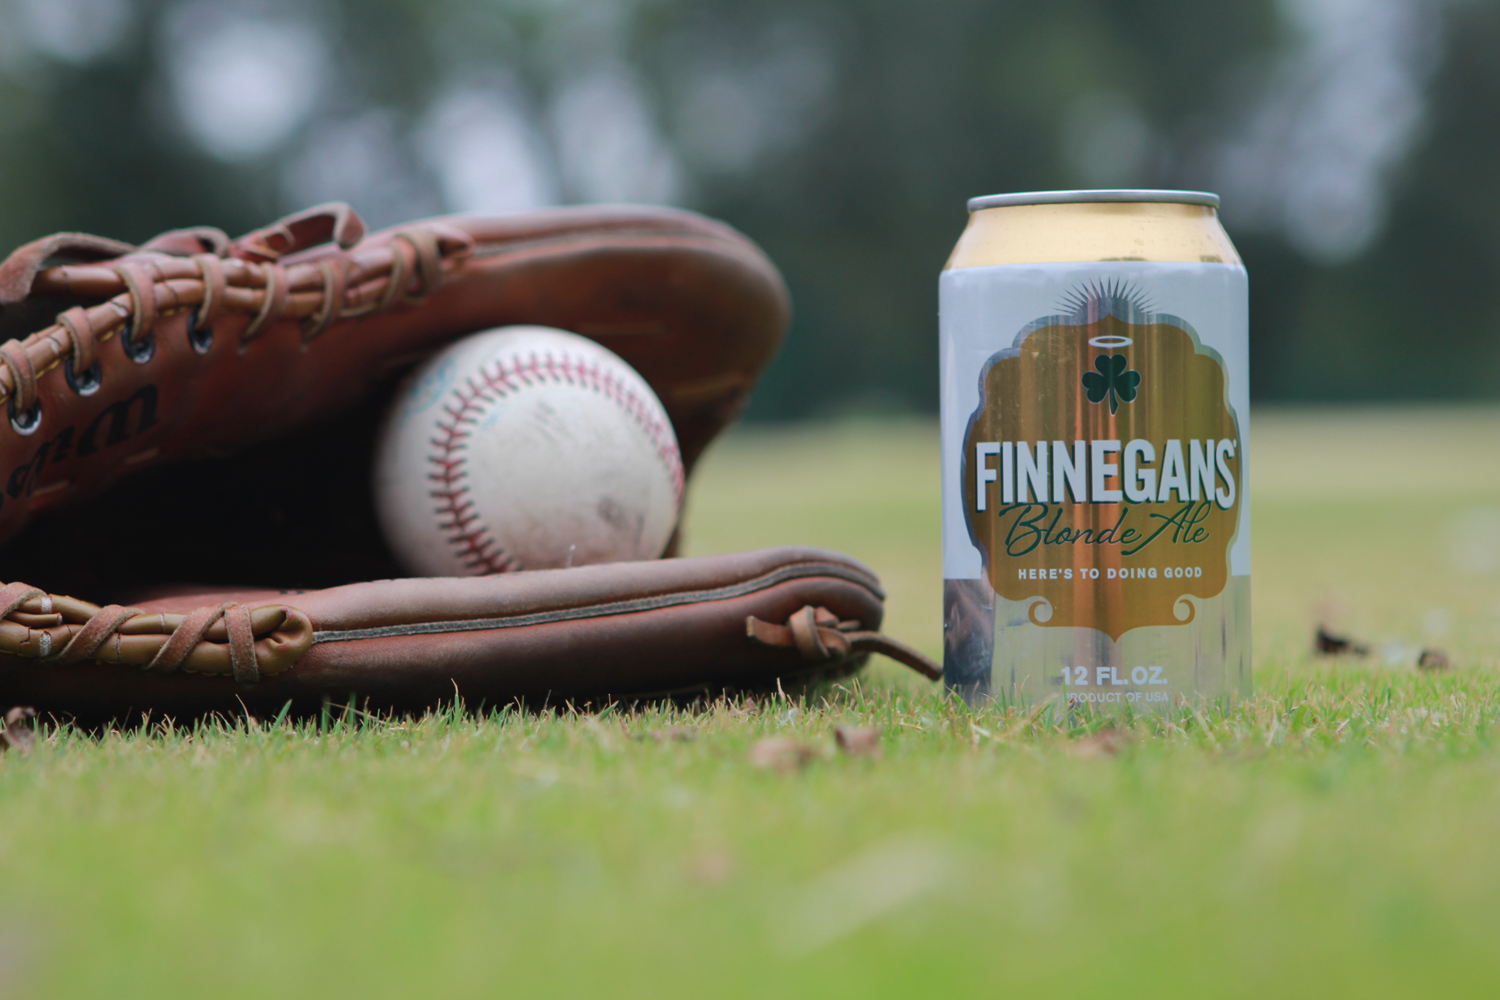 Finnegans Summer Blonde Ale goes perfectly with adventure.